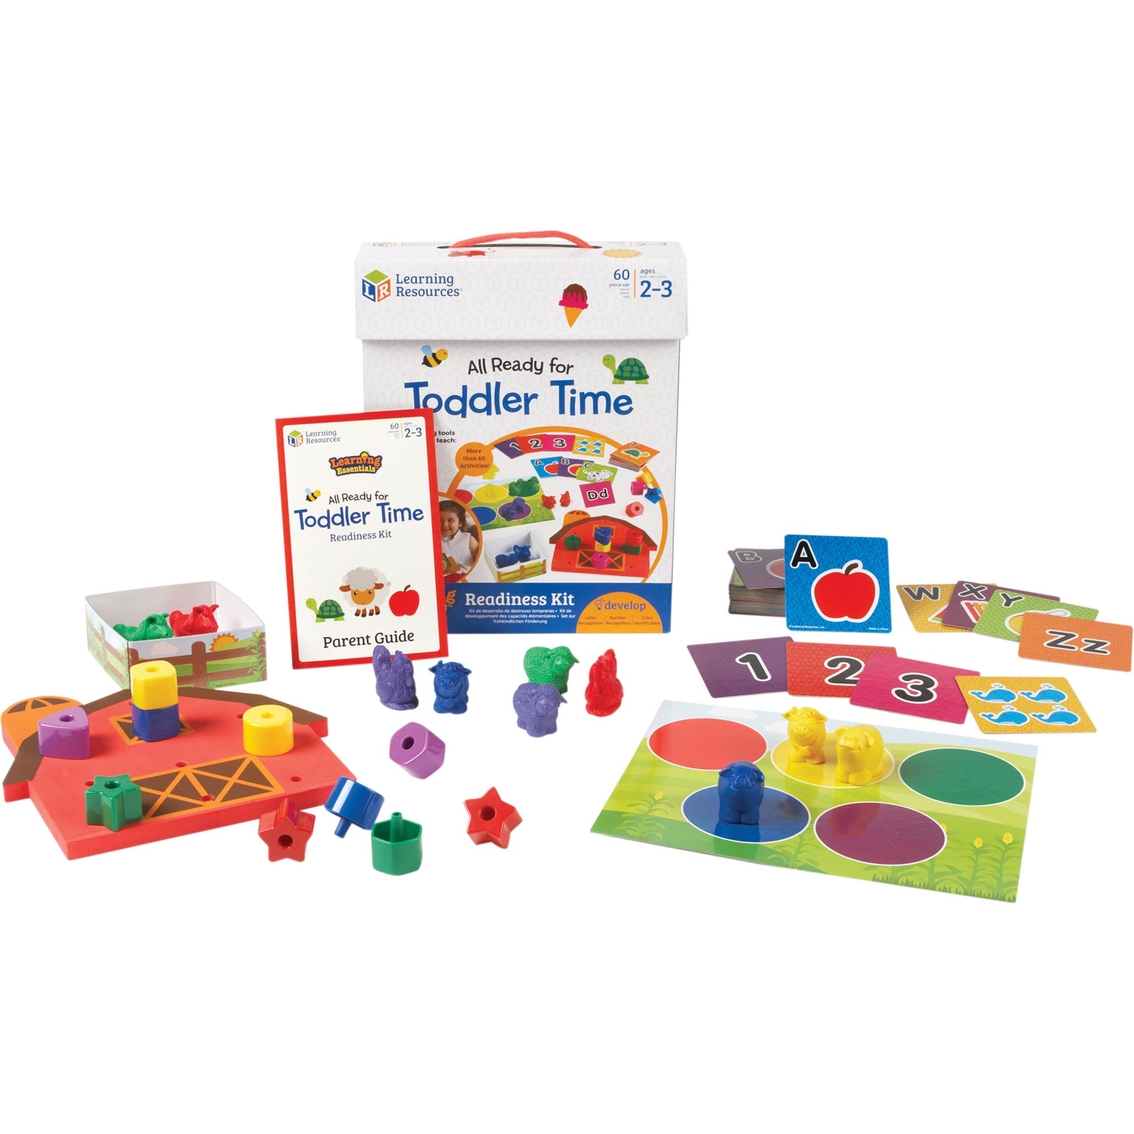 Learning Resources All Ready for Toddler Time Readiness Kit - Image 3 of 3